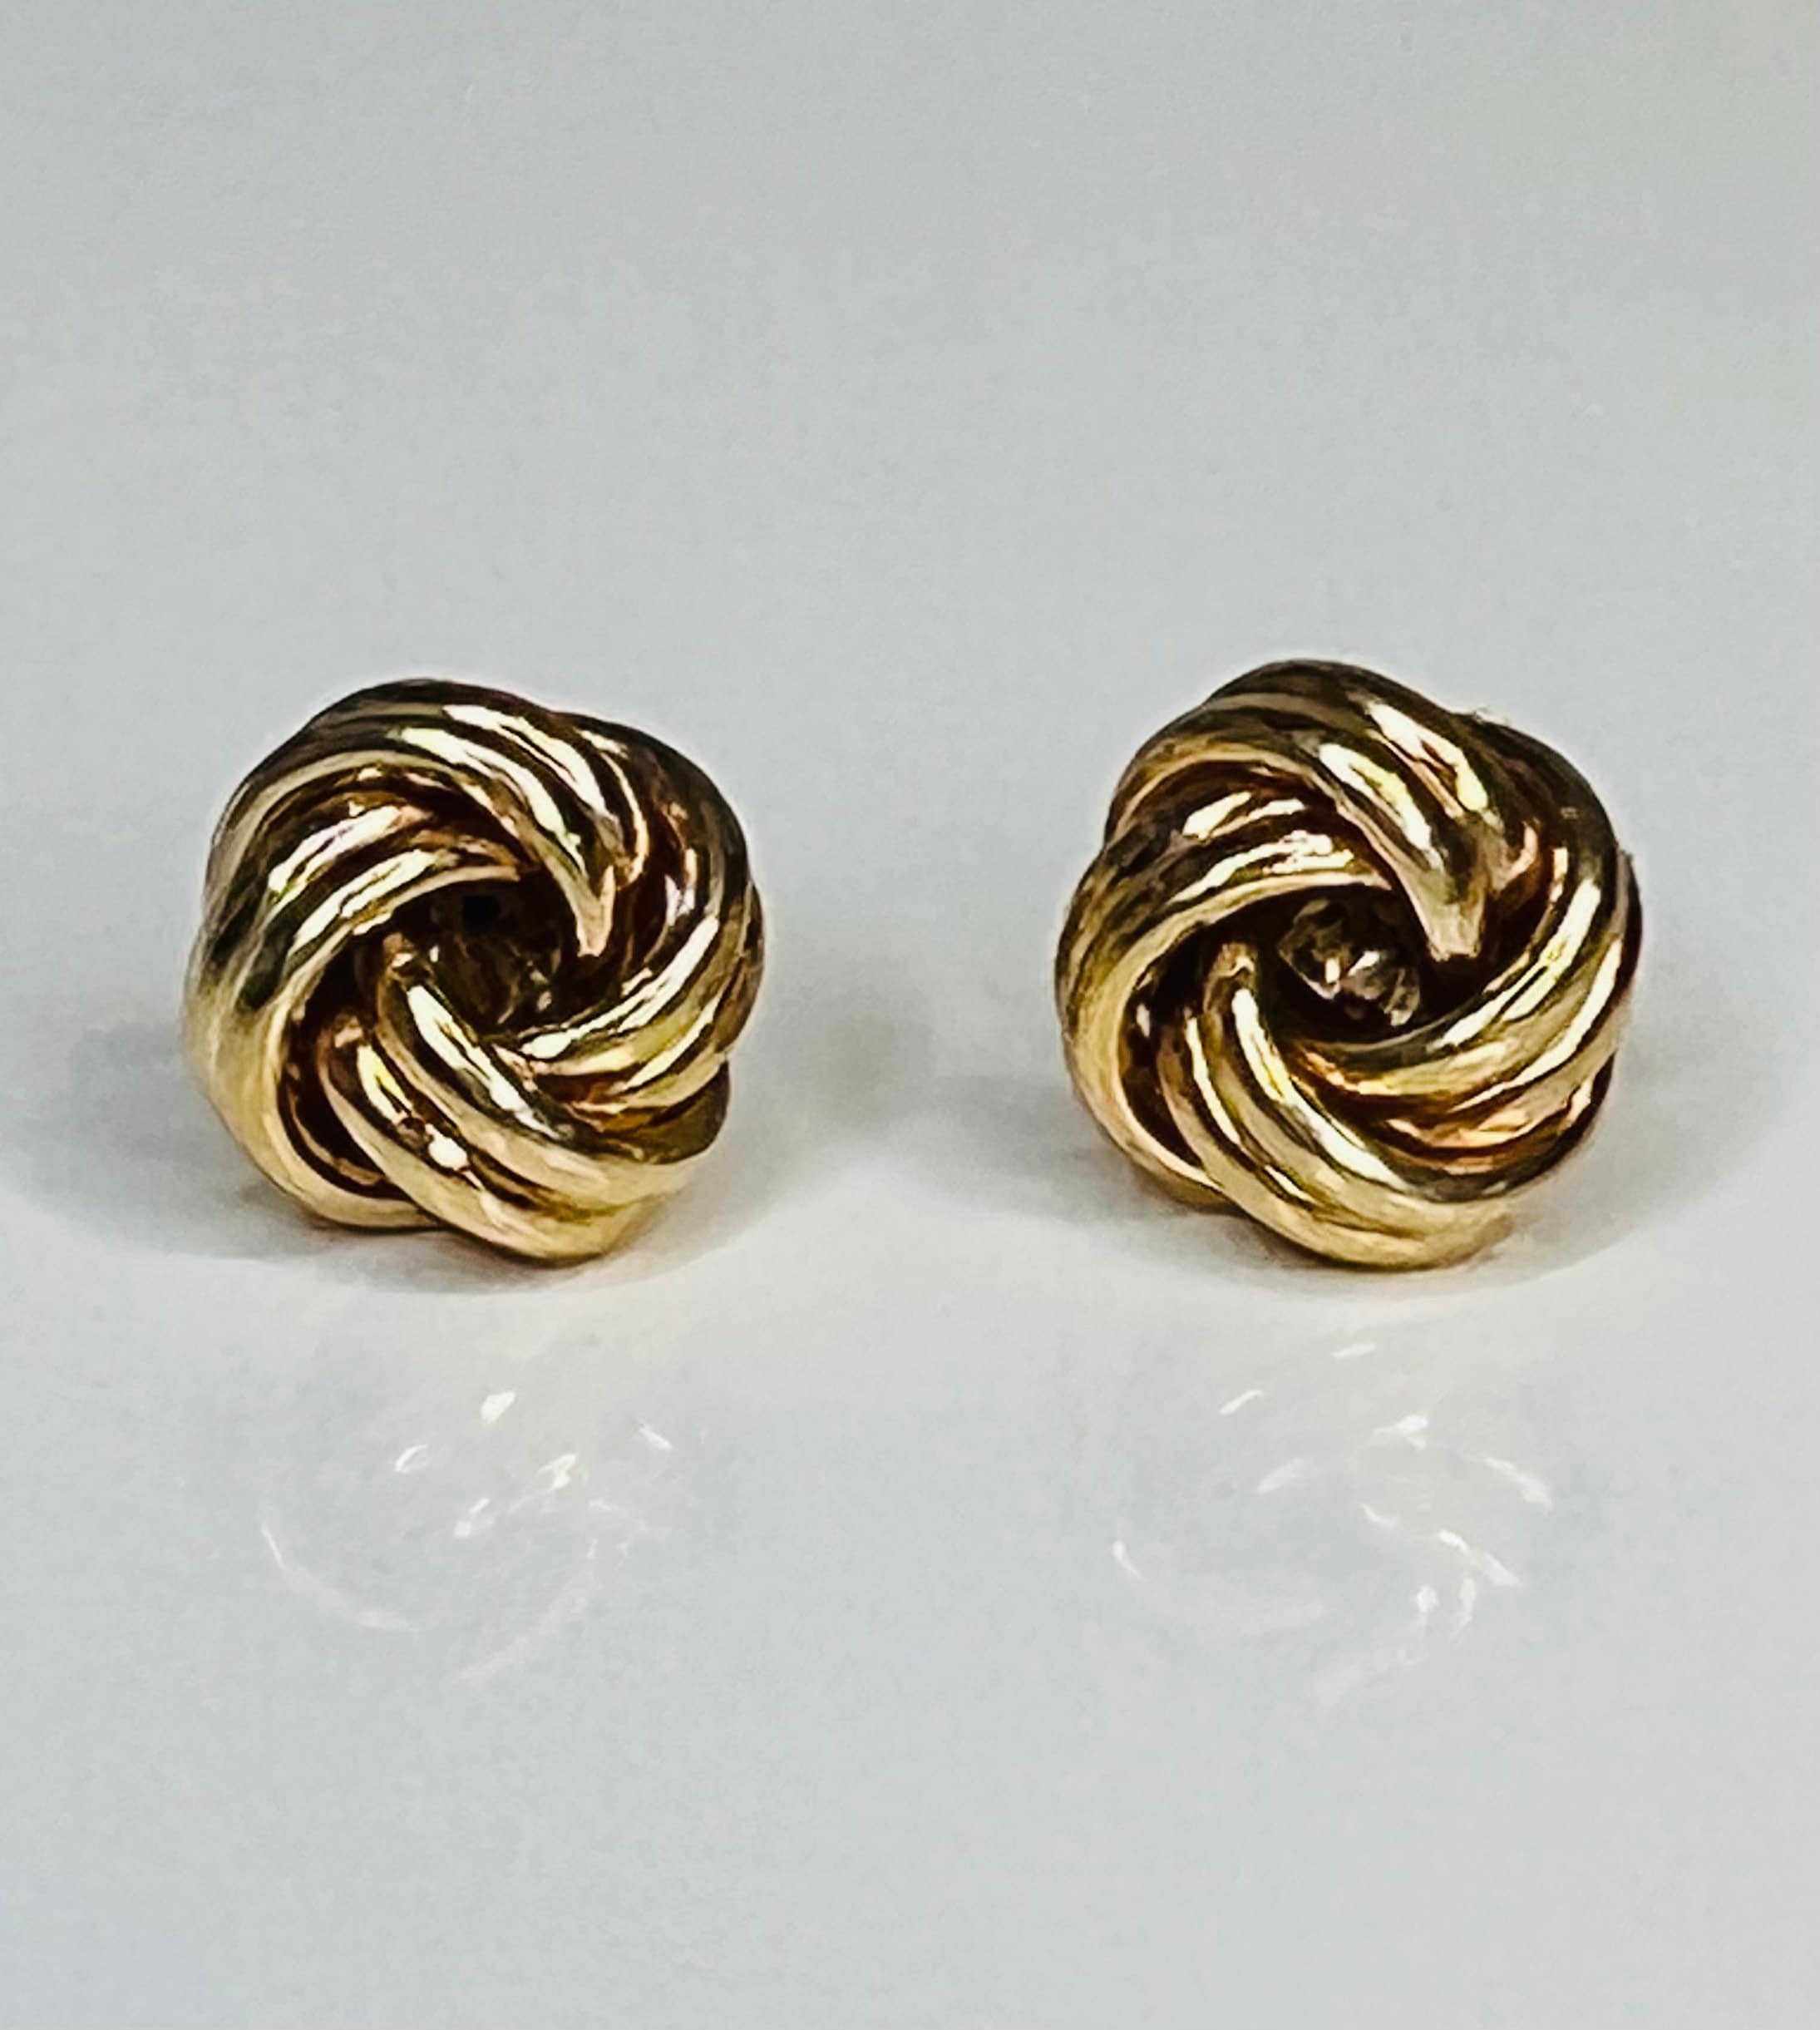 Share more than 63 gold love knot earrings best